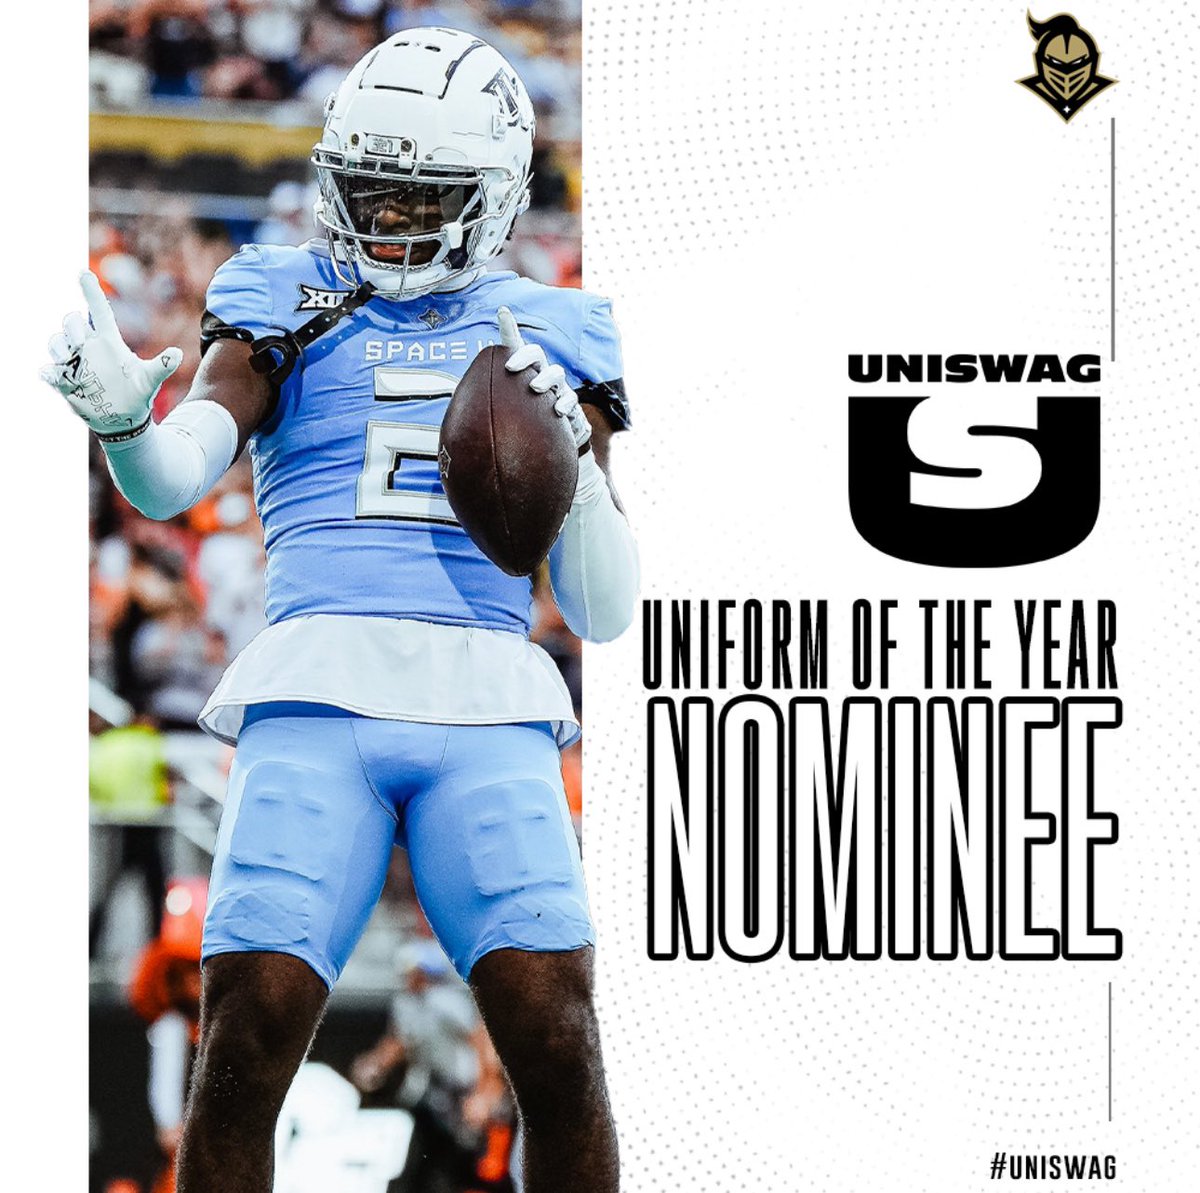 🚨KNIGHT NATION🚨 @UCF_Football’s Space uniform has been nominated for @UNISWAG’s UNIFORM OF THE YEAR! Save this link: uniswag.com/uniform-of-the… Sunday, February 25 @ 12:00 Noon, voting opens! I’ll definitely remind you to vote but I know the POWER of KNIGHT NATION! BOOM!💥